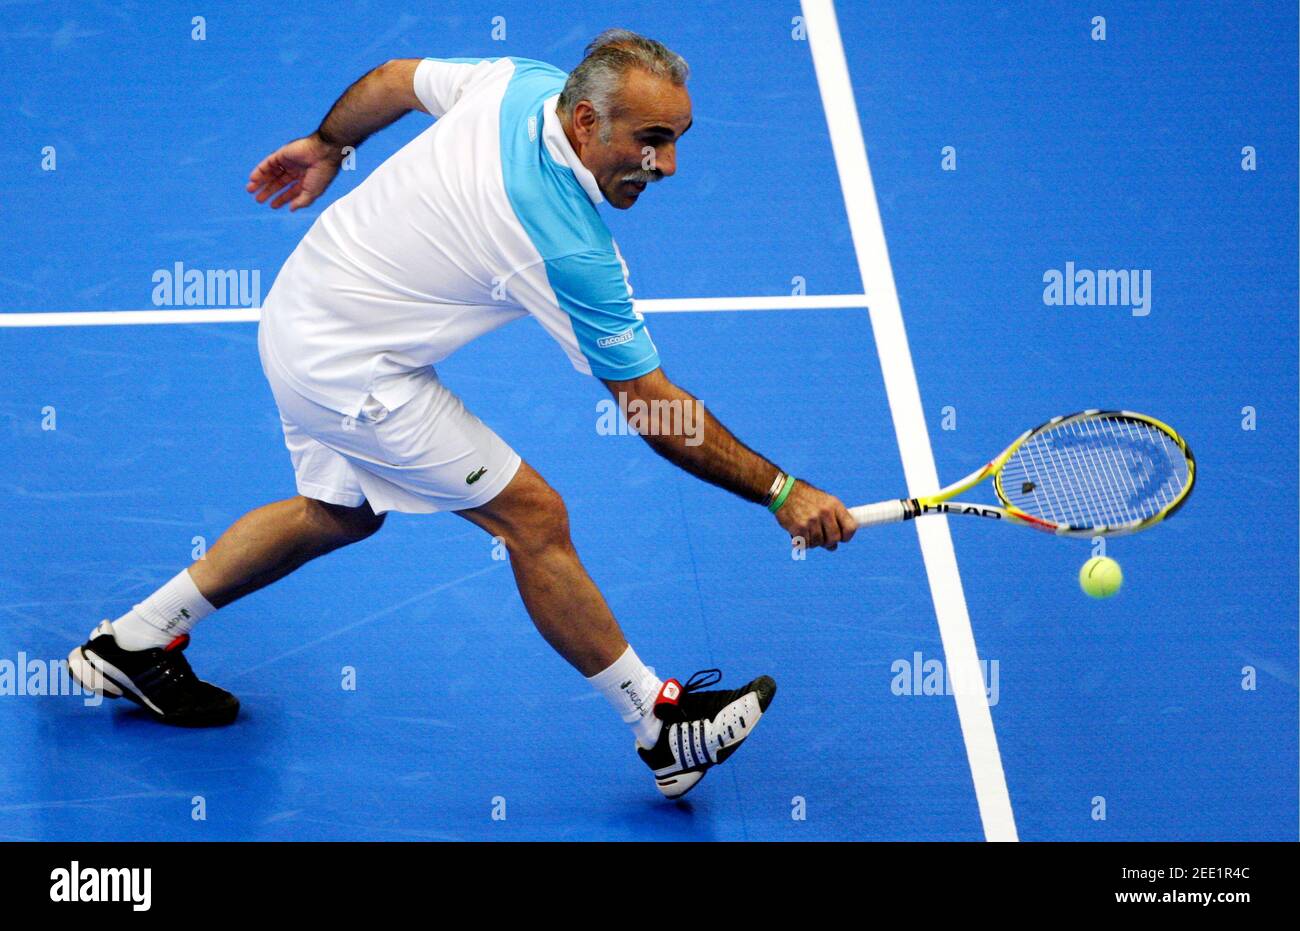 Tennis - AEGON Masters - Royal Albert Hall, London - 1/12/09 Iran's Mansour  Bahrami in action during the men's doubles Mandatory Credit: Action Images  / Matthew Childs Stock Photo - Alamy